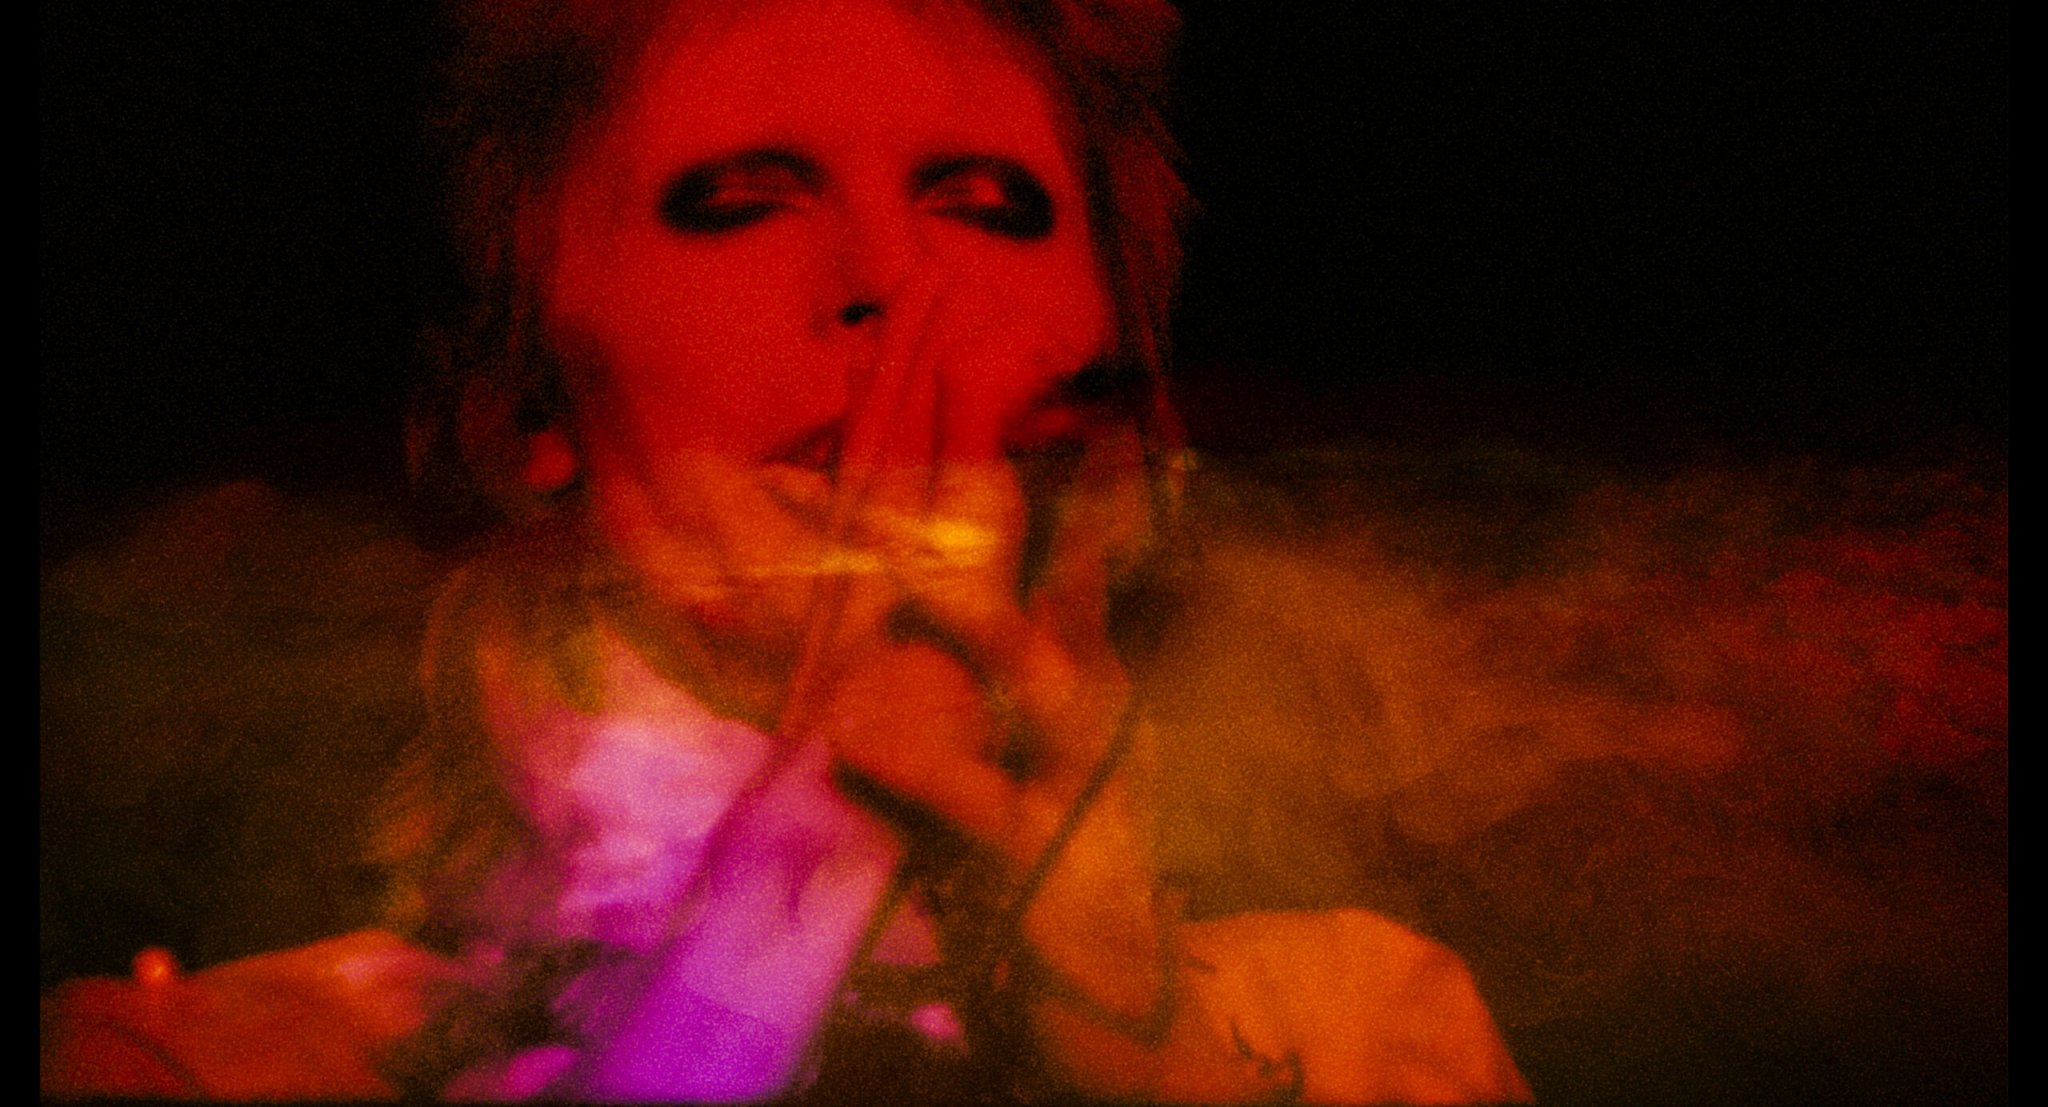 Moonage Daydream Shows the Rise and Fall of Ziggy Stardust